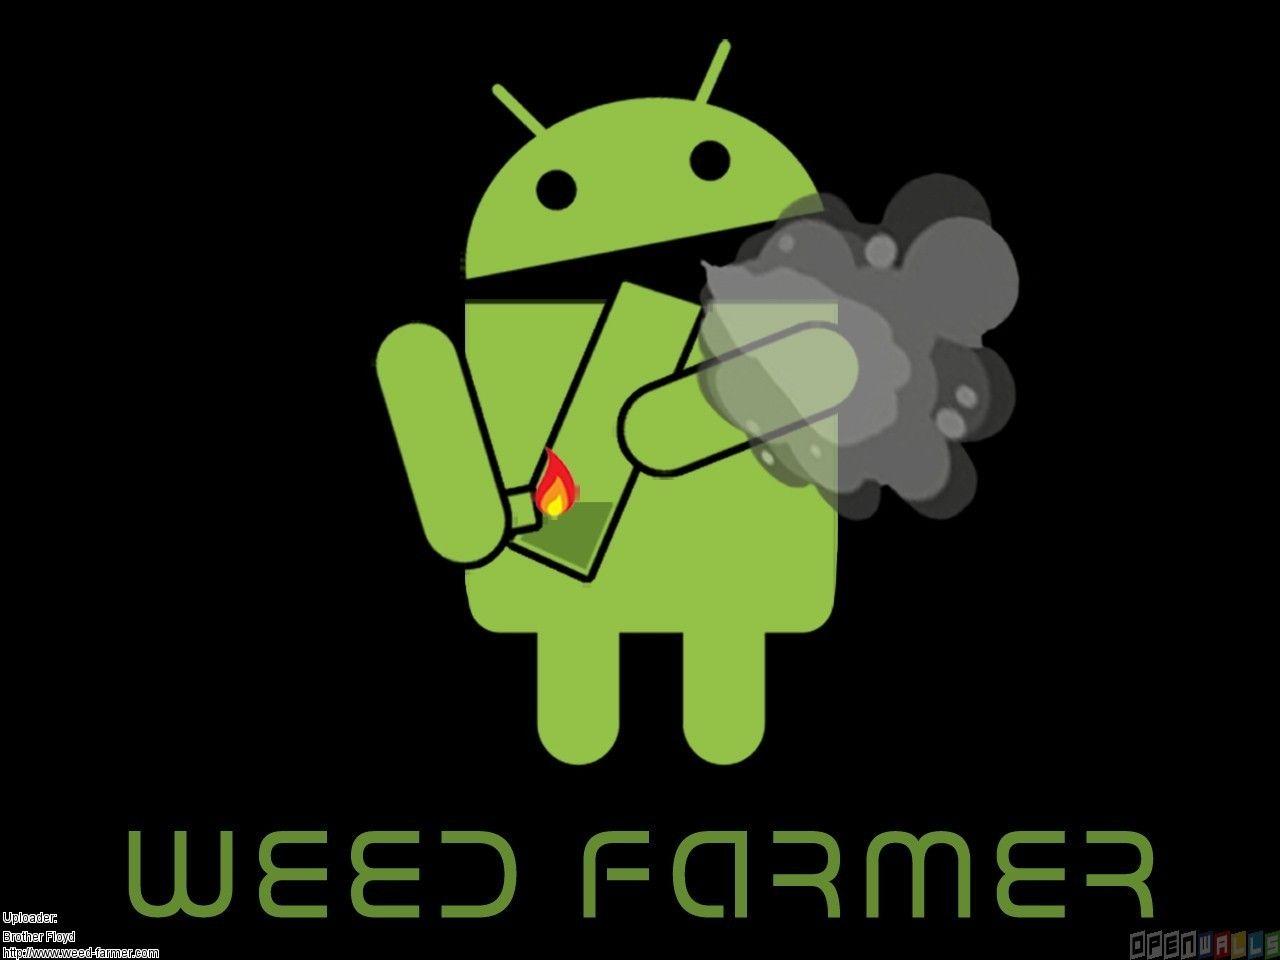 Android smoking a bong on black background 3 4 wallpaper